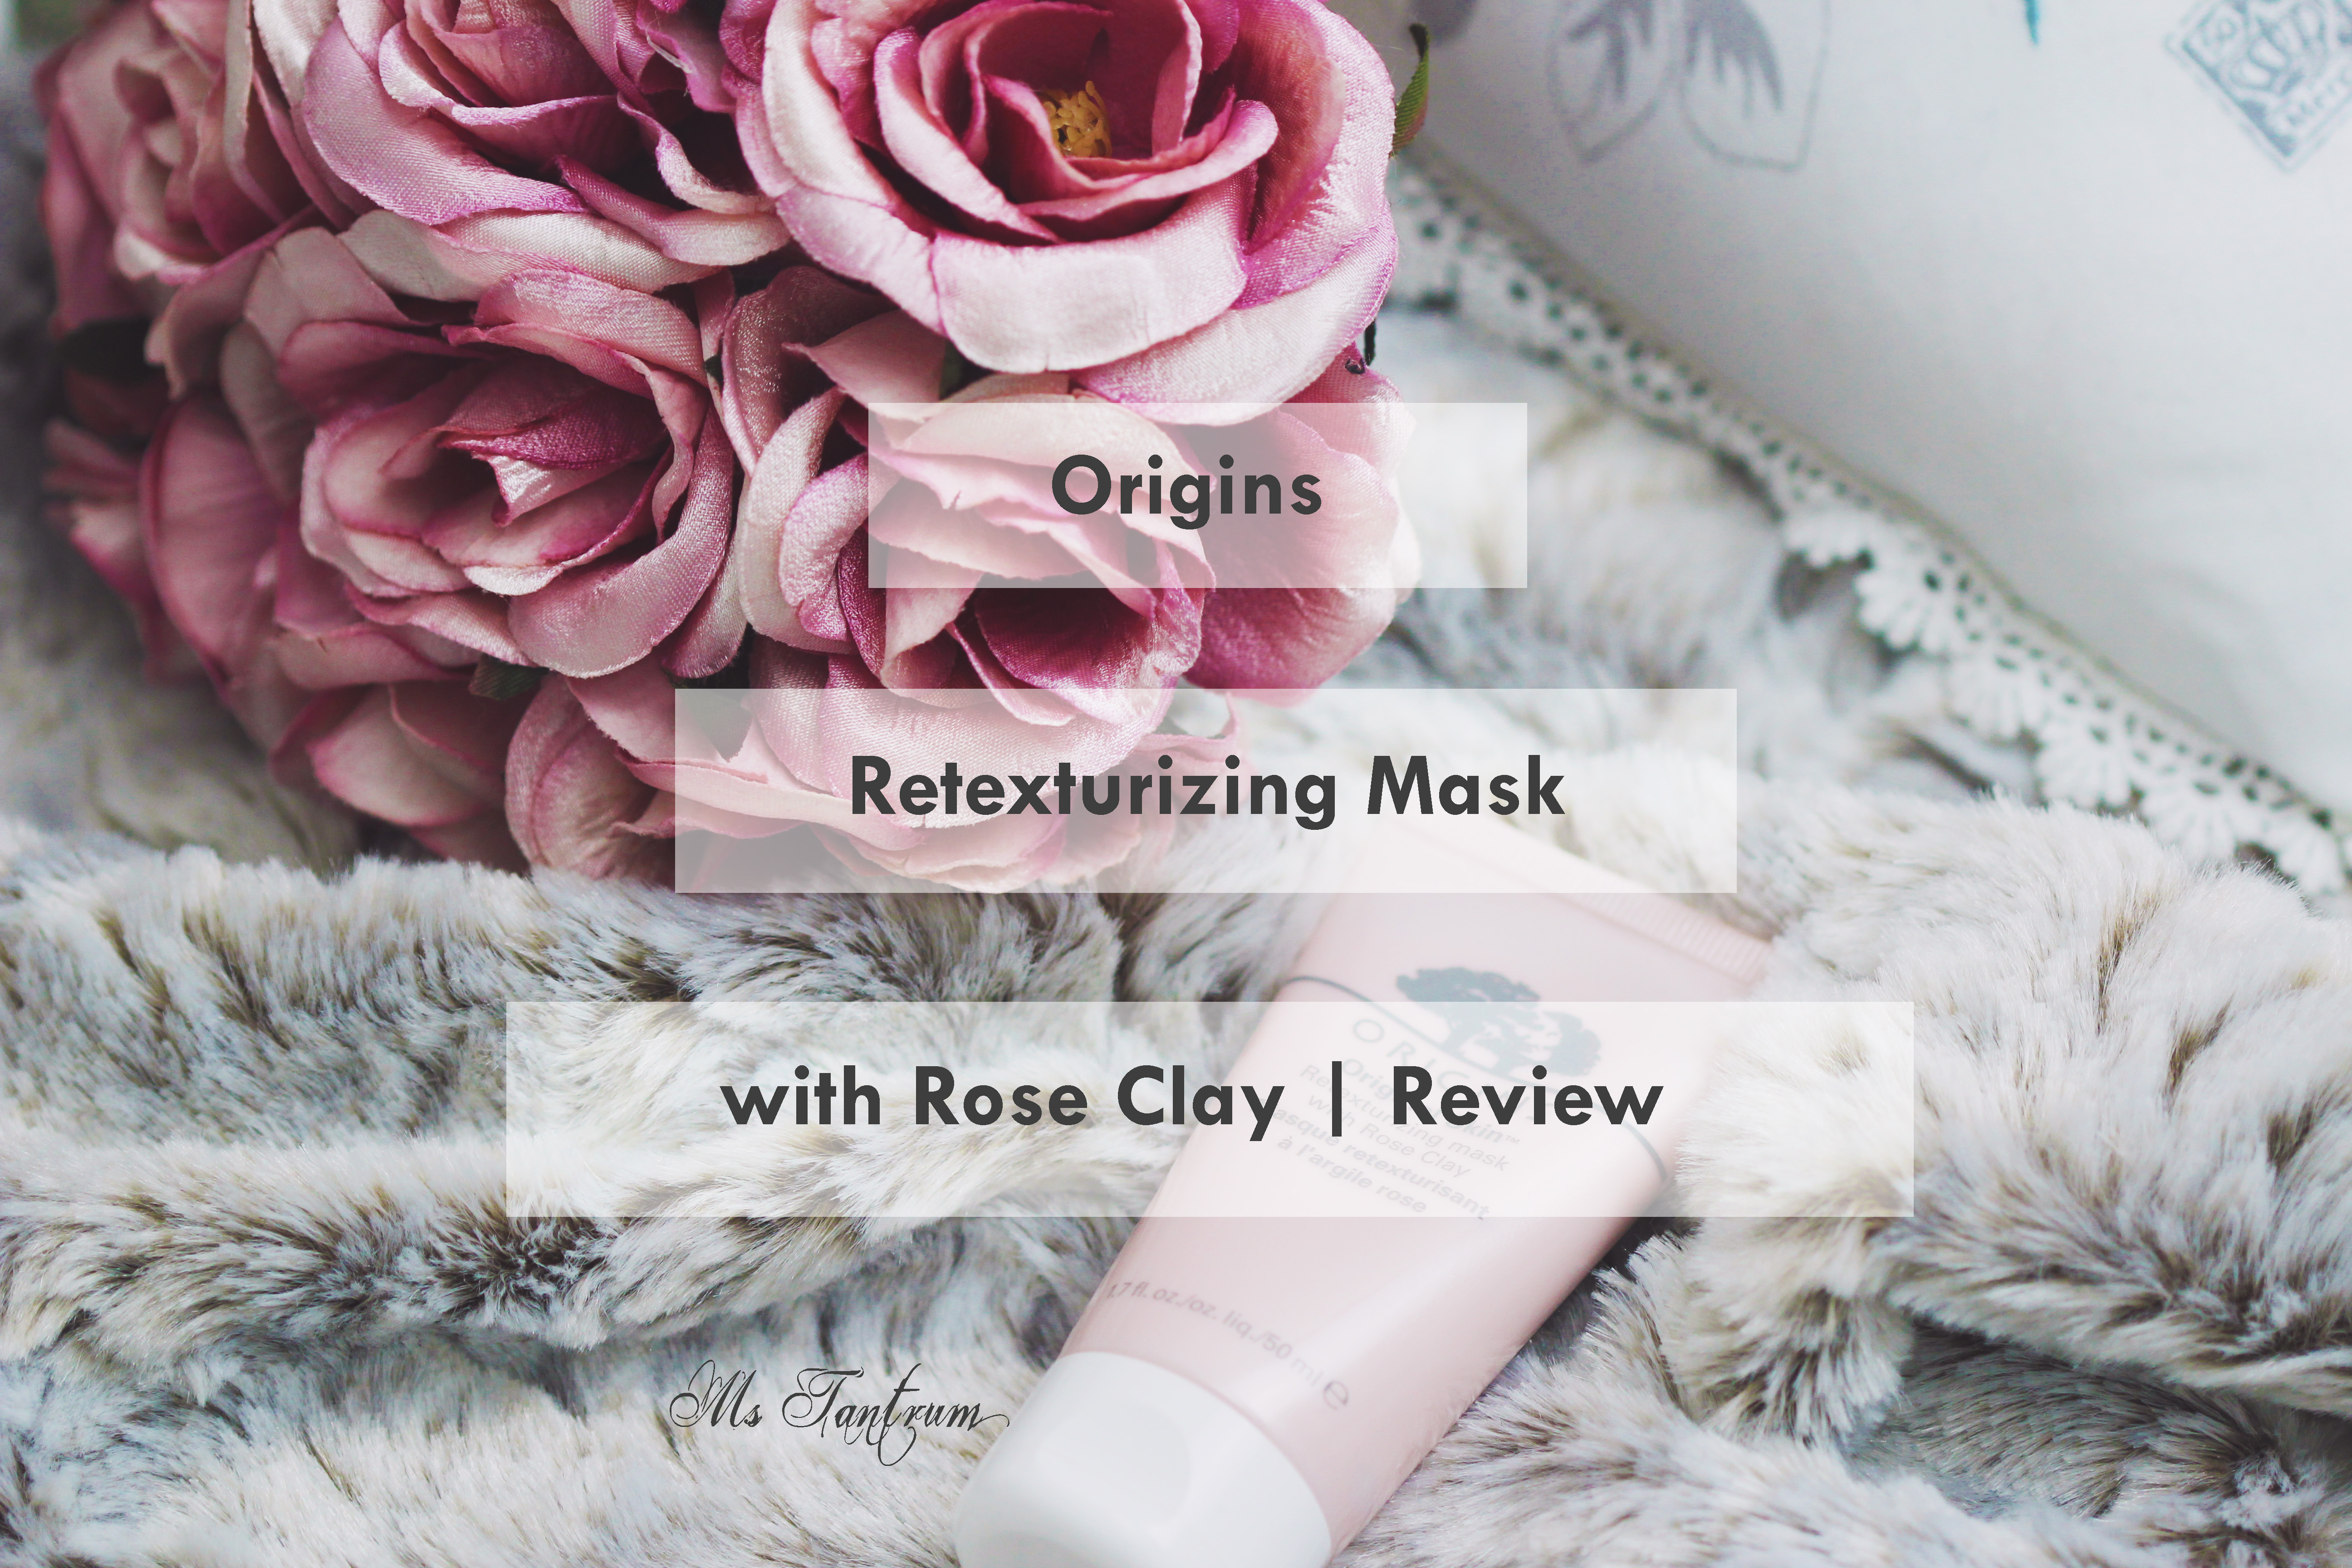 Origins Retexturizing mask with rose clay